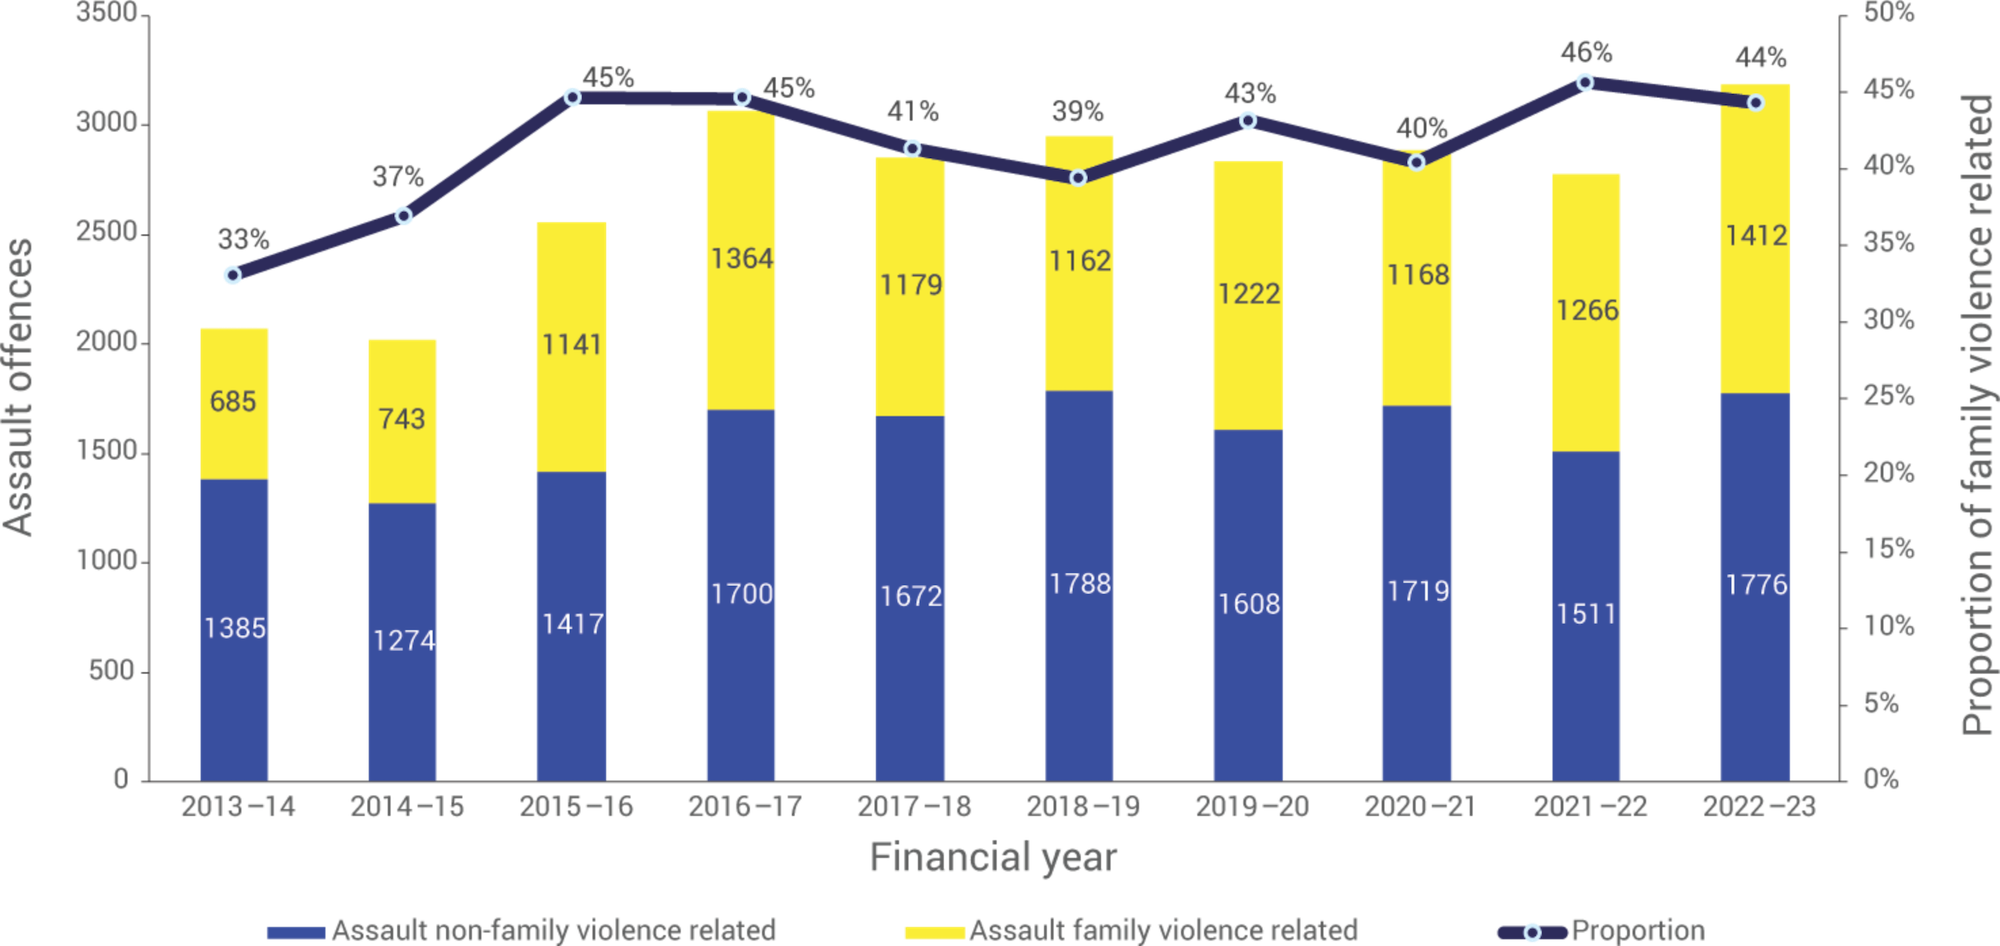 This Figure is a column graph depicting the proportion of family violence related assaults over a 10-year period, from the 2013-14 financial year to the 2022-23 financial year.